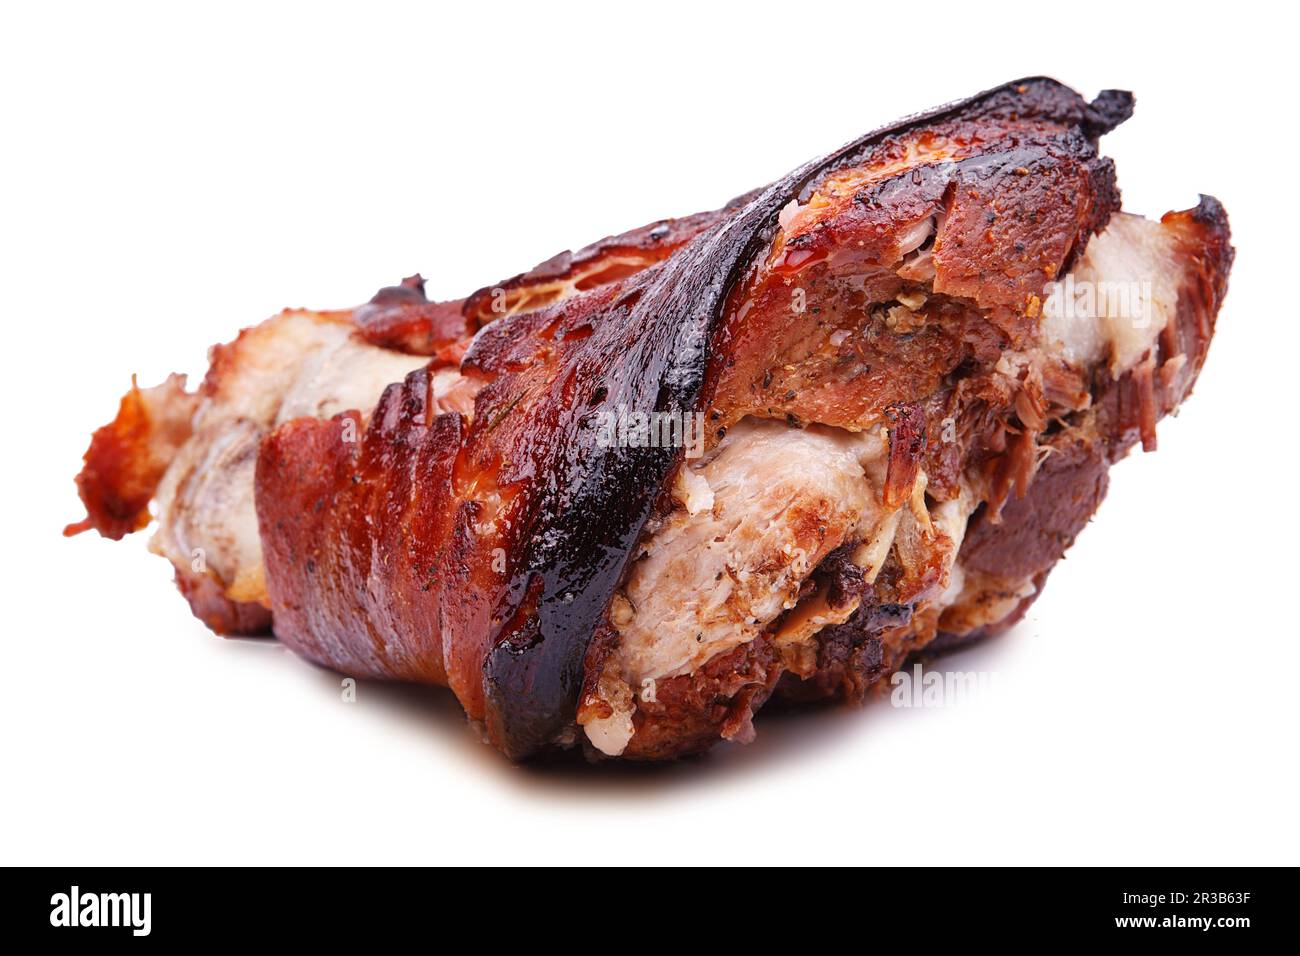 Roasted pork knuckle. Czech cuisine. Grilled German Pork Knuckle isolated on white background. Stock Photo